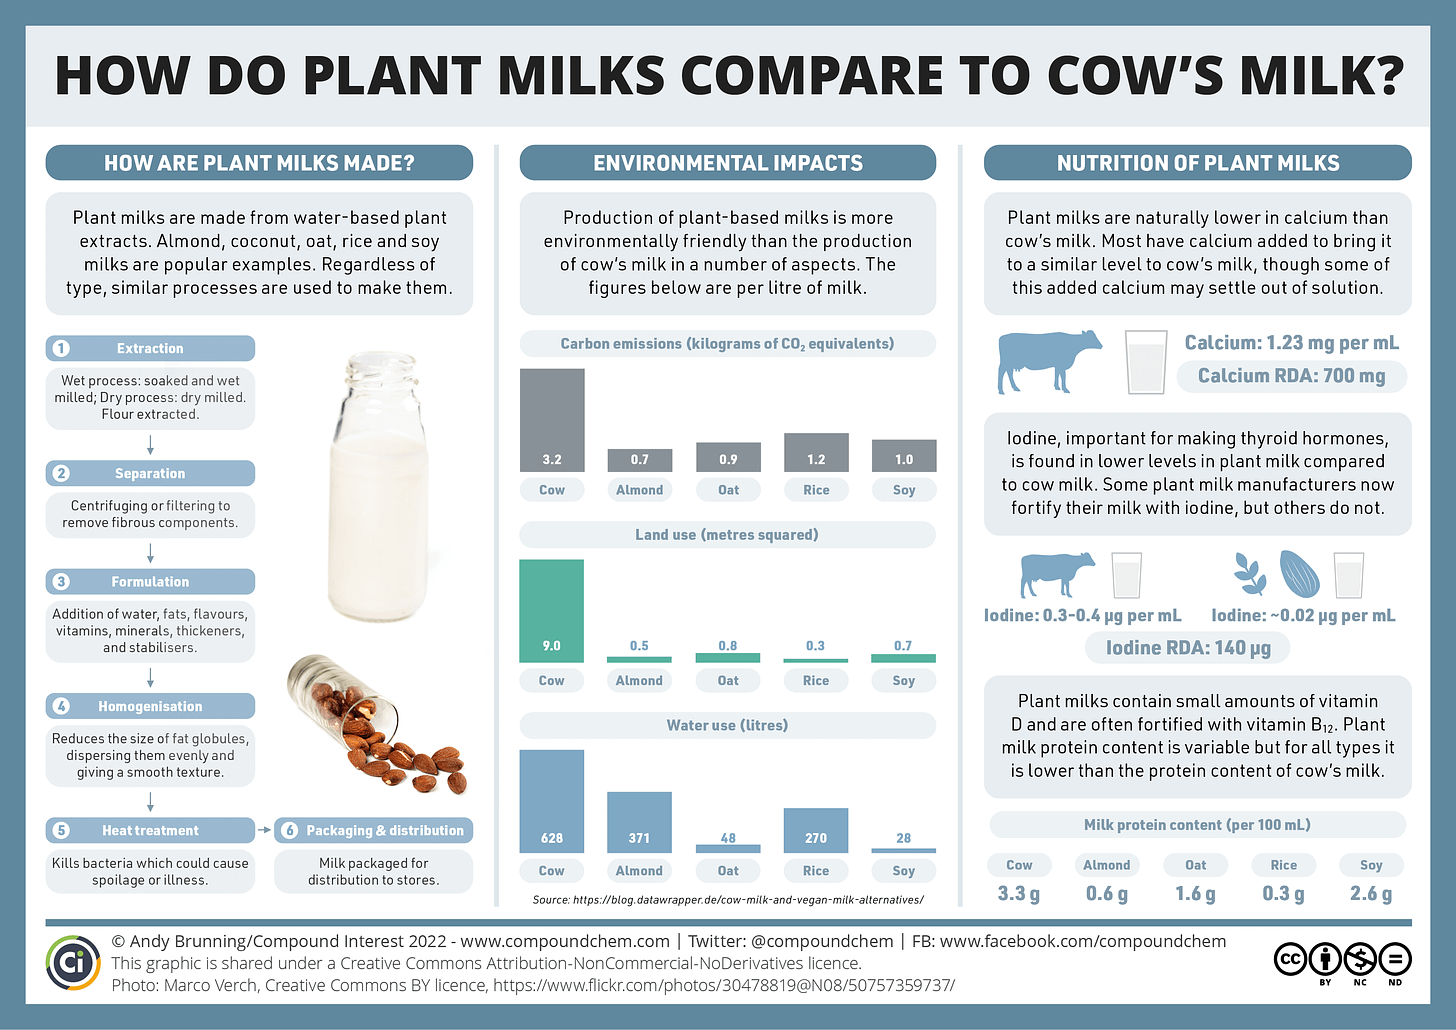 Three-column Infographic on how plant milks compare to dairy milk. The first column highlights how plant milks are made: plant materials are either soaked and milled or dry milled, filtered to remove fibrous components, then formulated with water and other additions. They are then homogenised, heat treated, and packaged. The second column highlights the environmental impact of cow's milk, which has higher carbon emissions, land use and water use per litre produced compared to all plant-based milks. The final column highlights nutritional differences. Plant milks are fortified with calcium, and some are fortified with iodine, both found naturally in cow's milk. Protein content for plant milks is lower than for cow's milk.